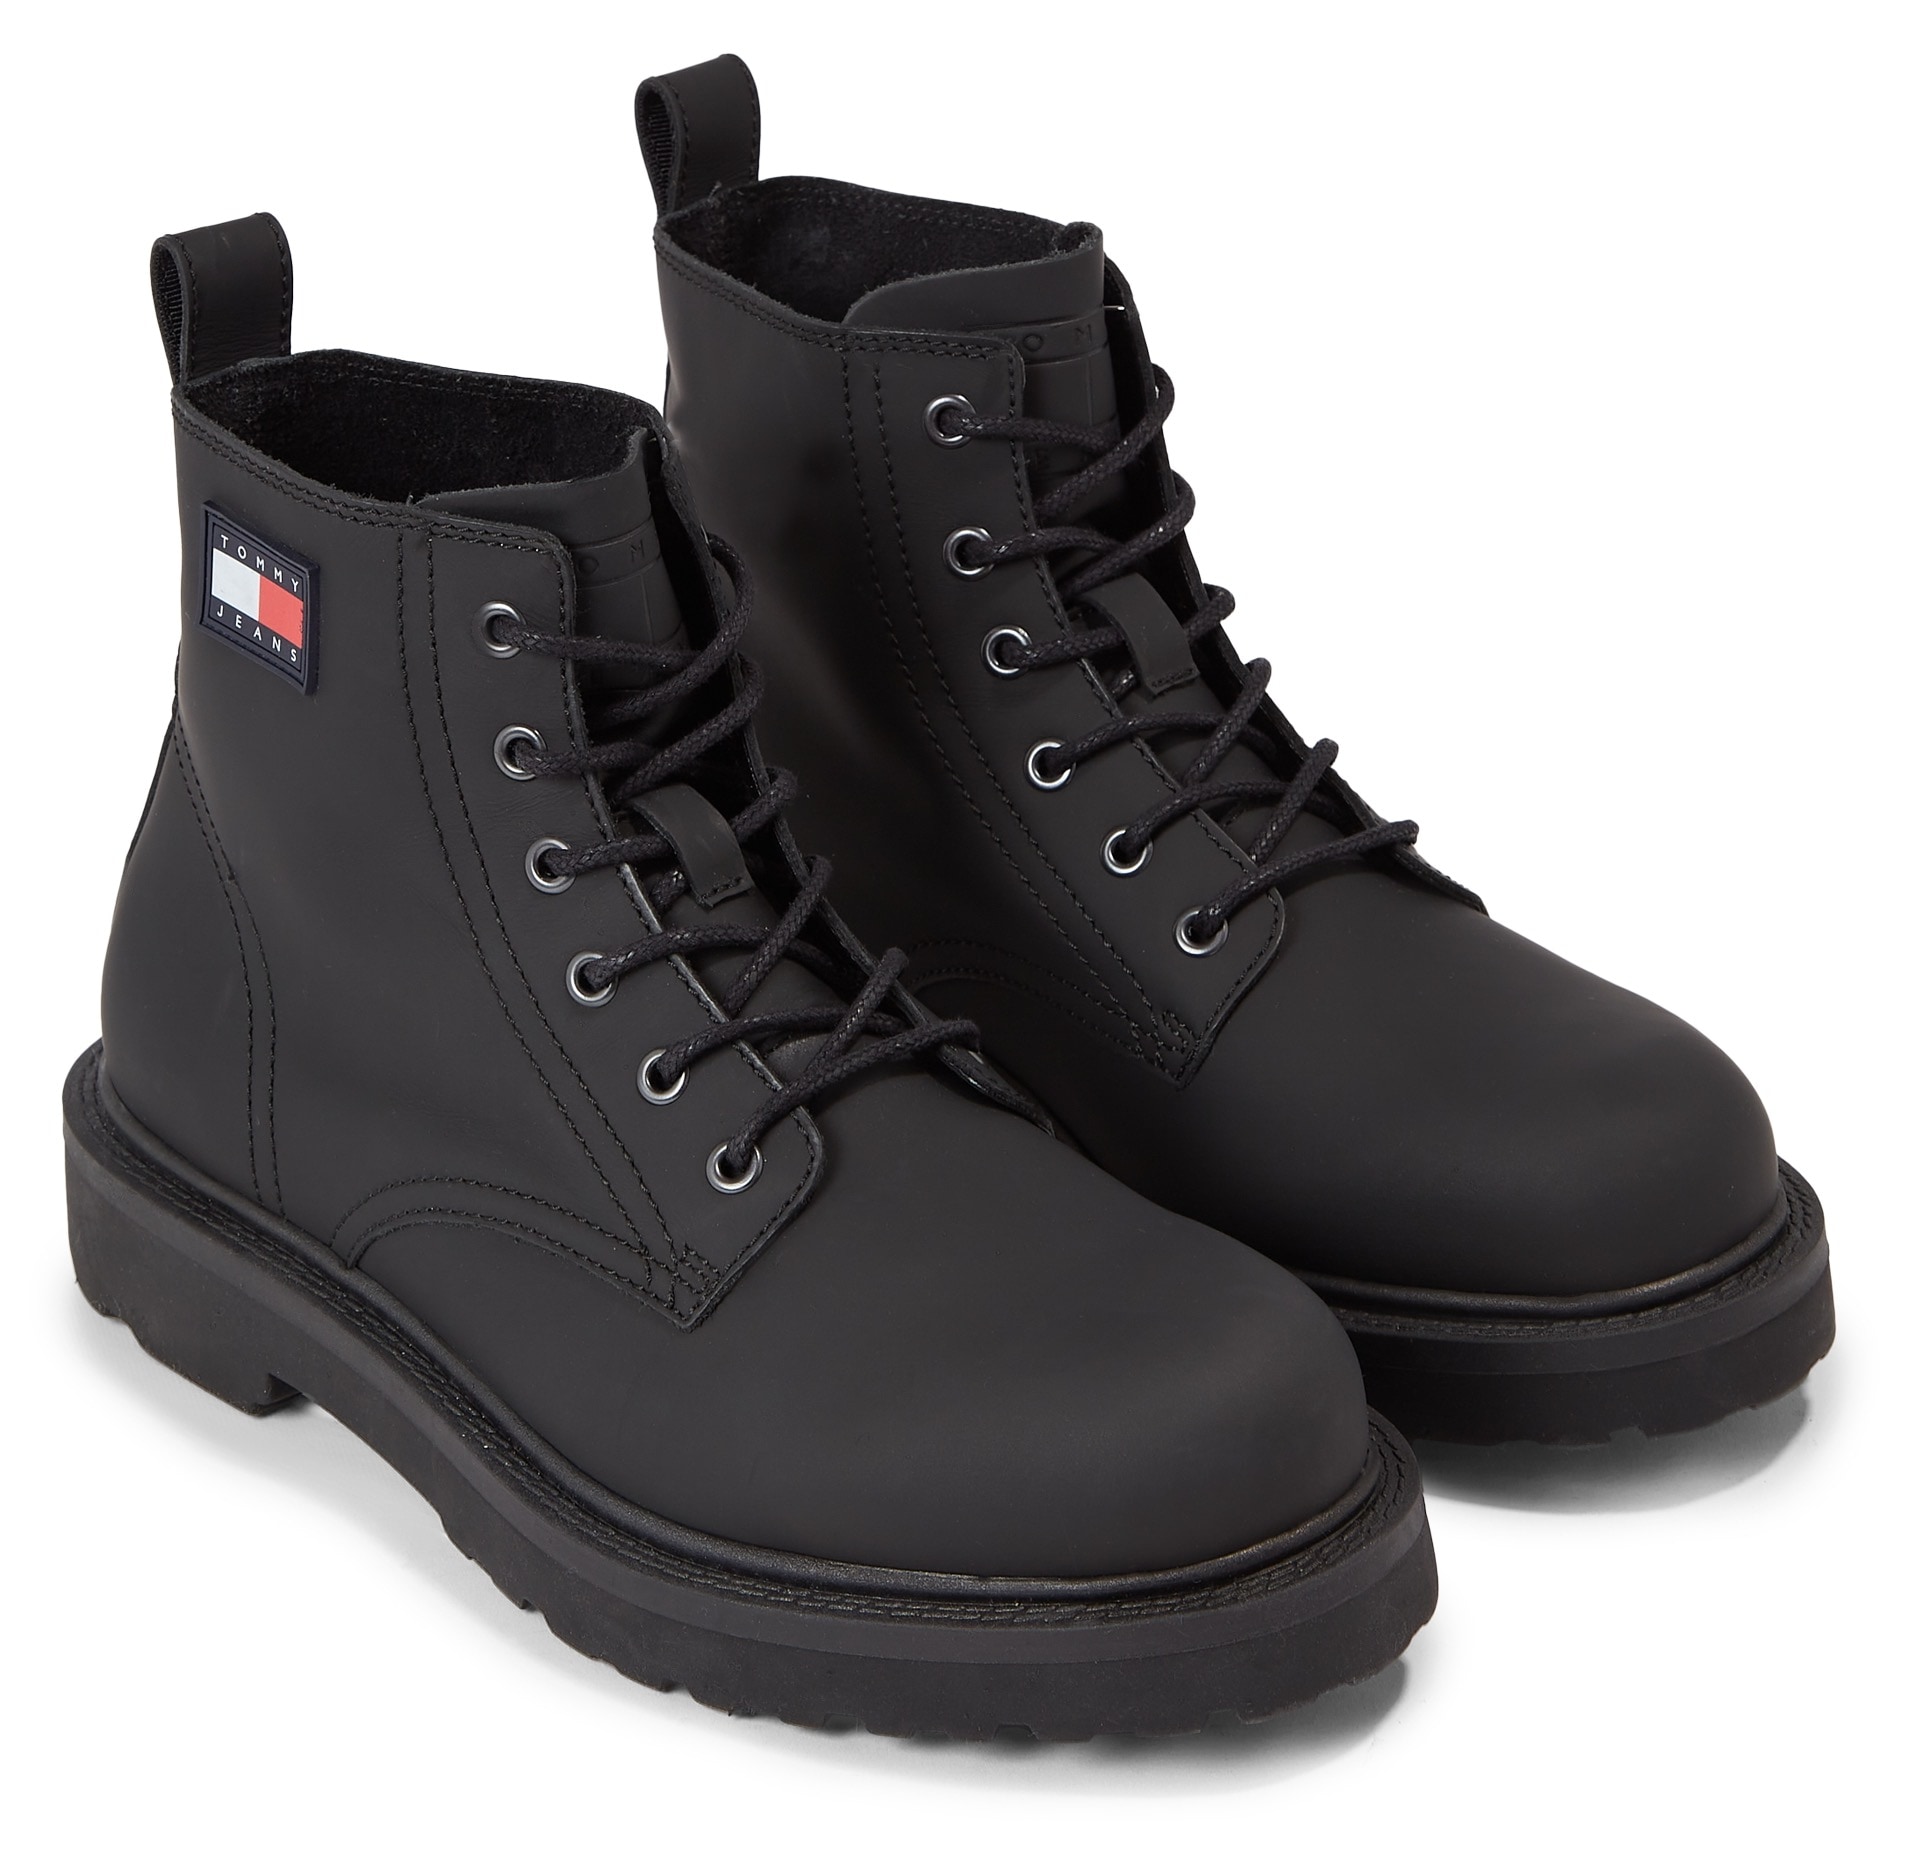 Schnürboots »TJM RUBERIZED LACE UP BOOT«, mit seitlicher Logoflagge